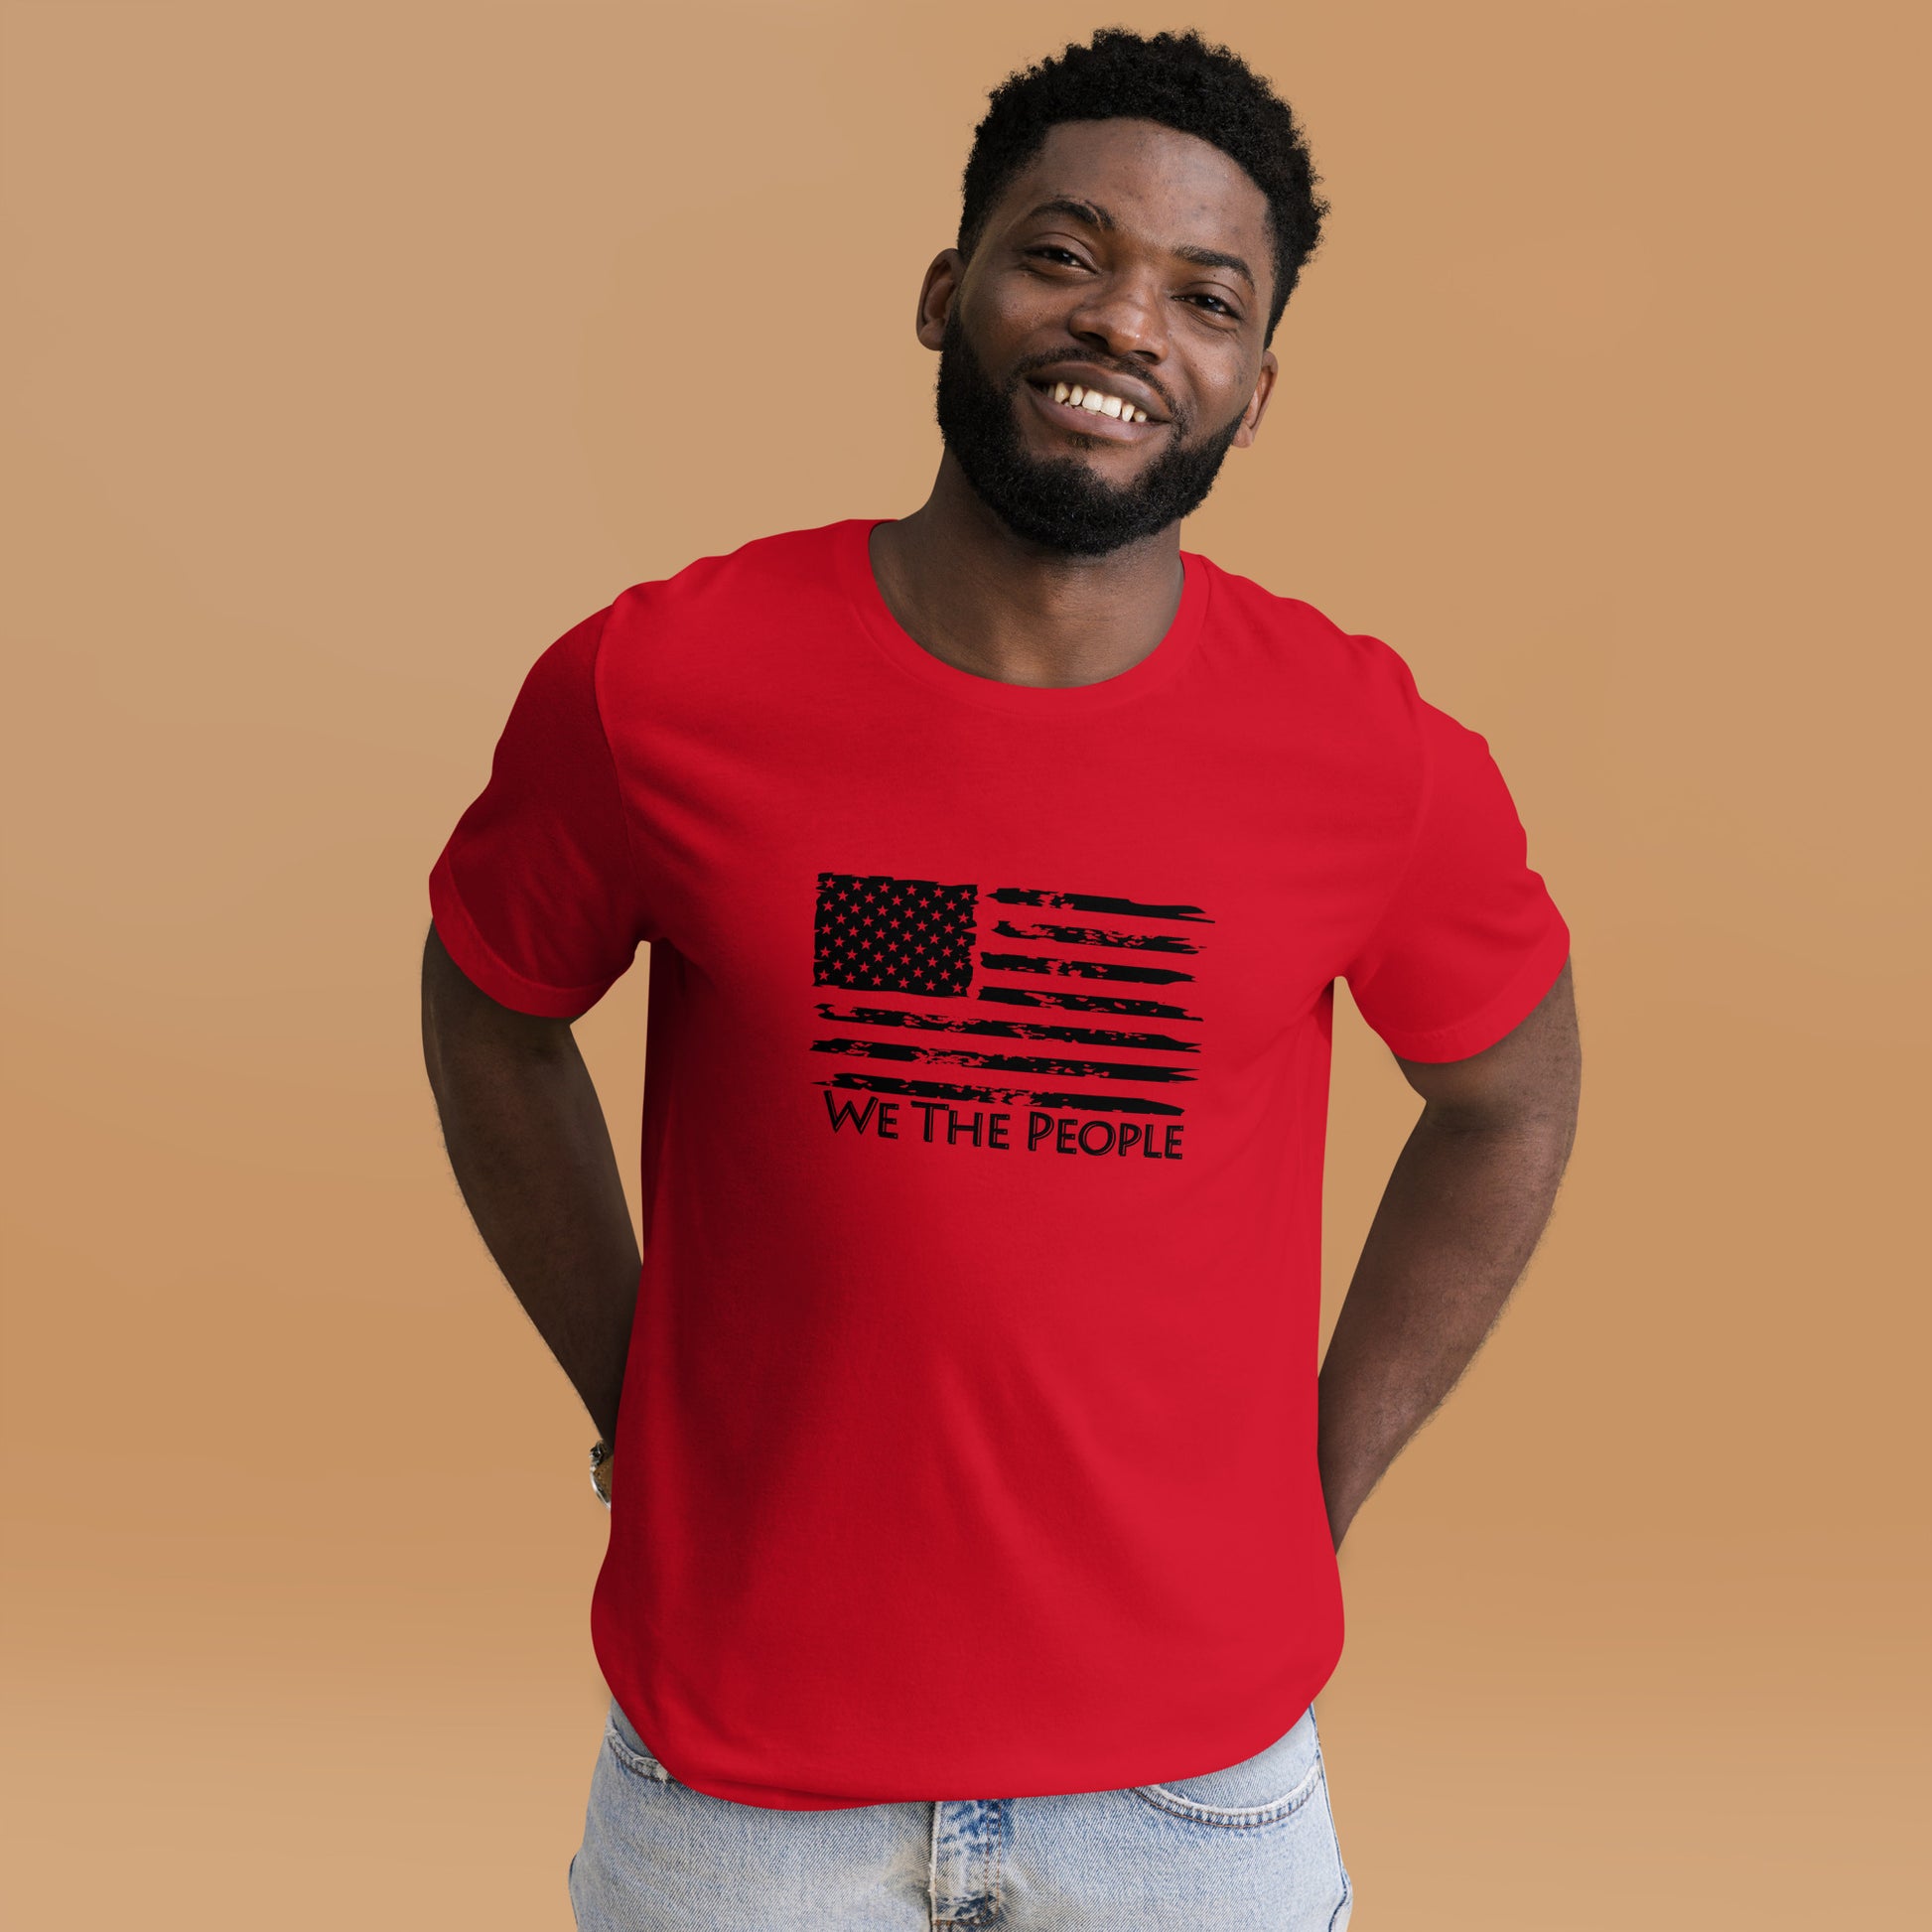 "We The People" tee: Your essential top for patriotic occasions